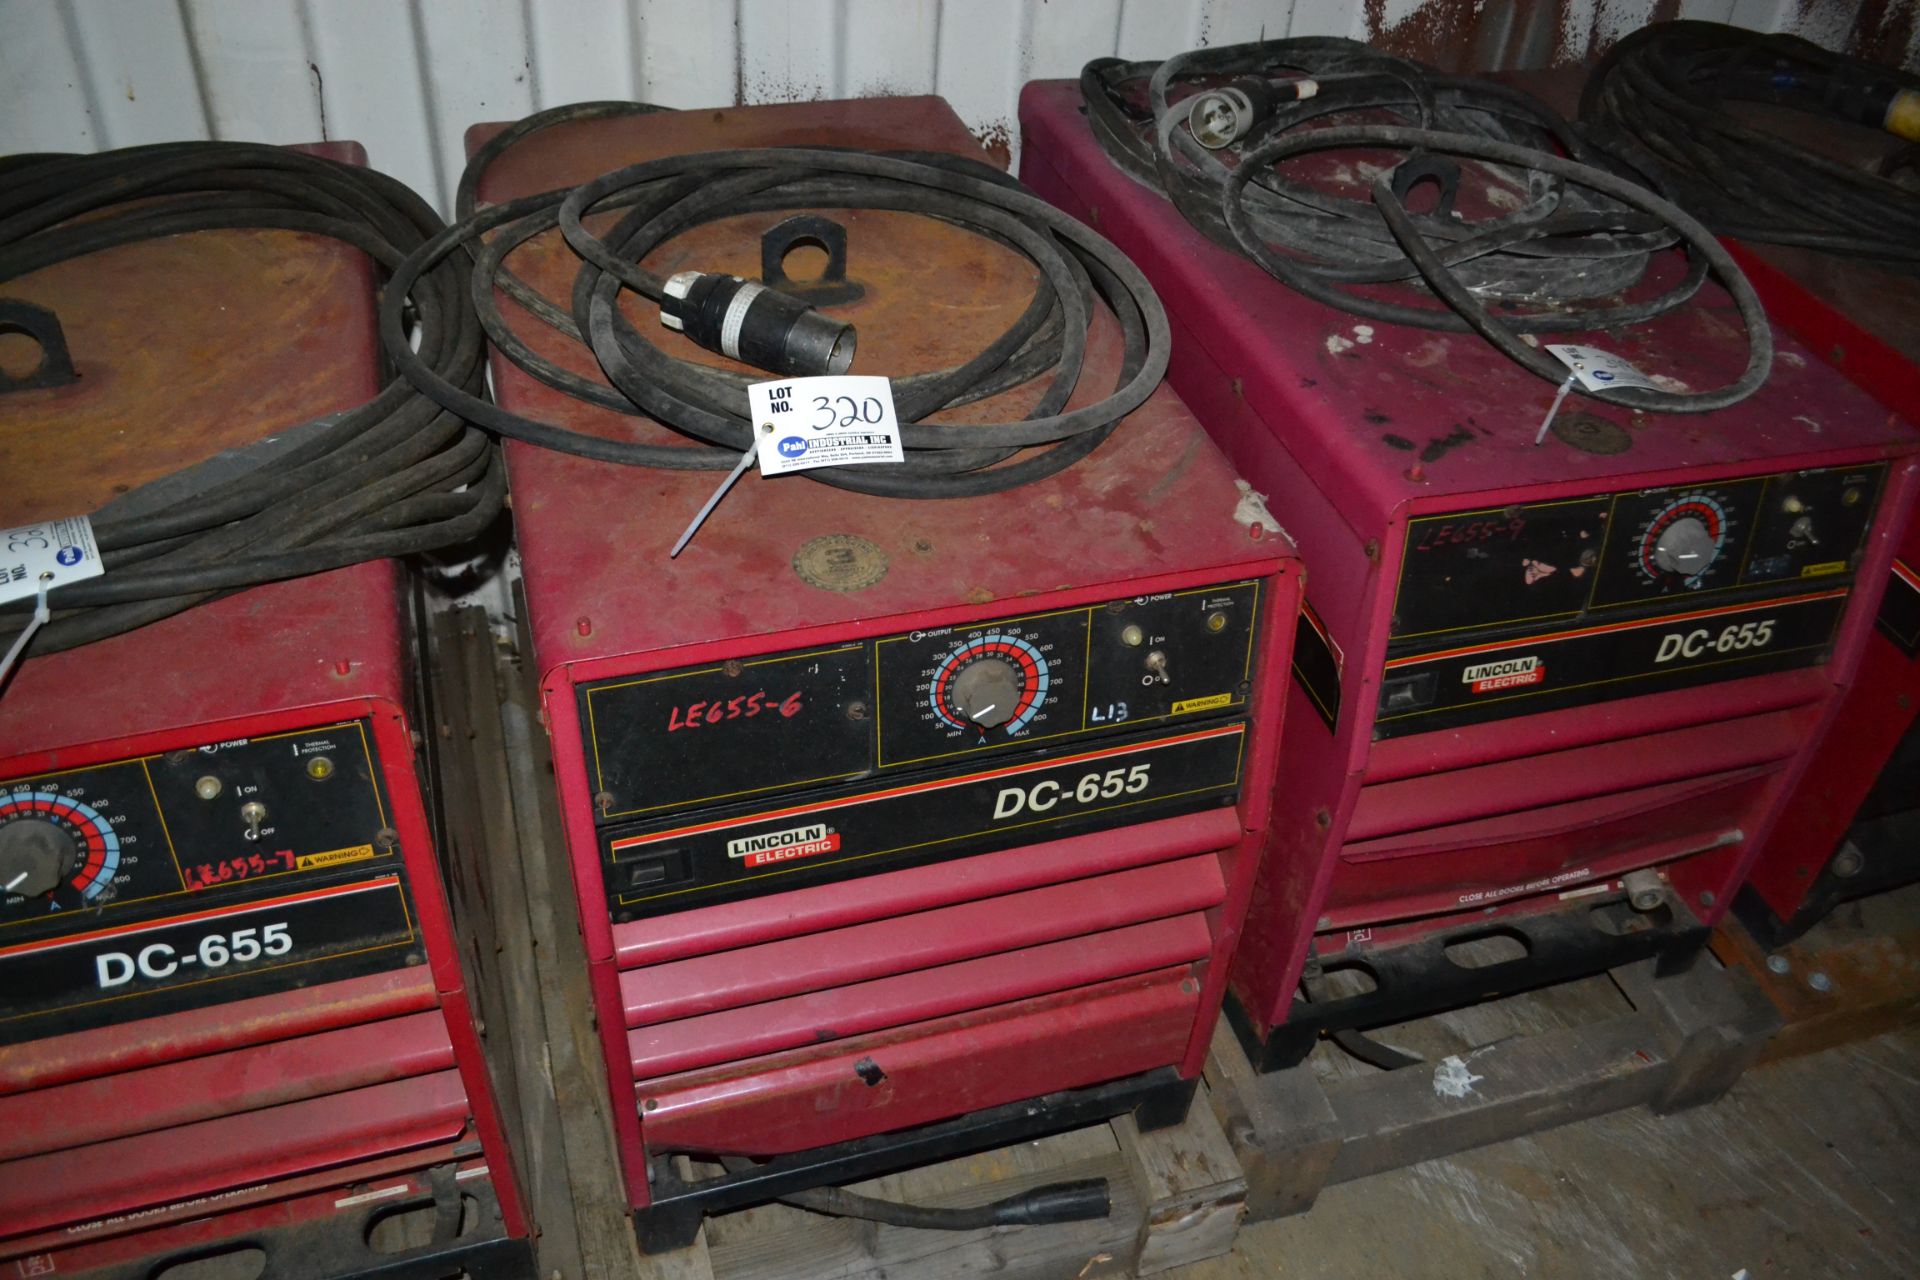 Lincoln DC-655 welding power source